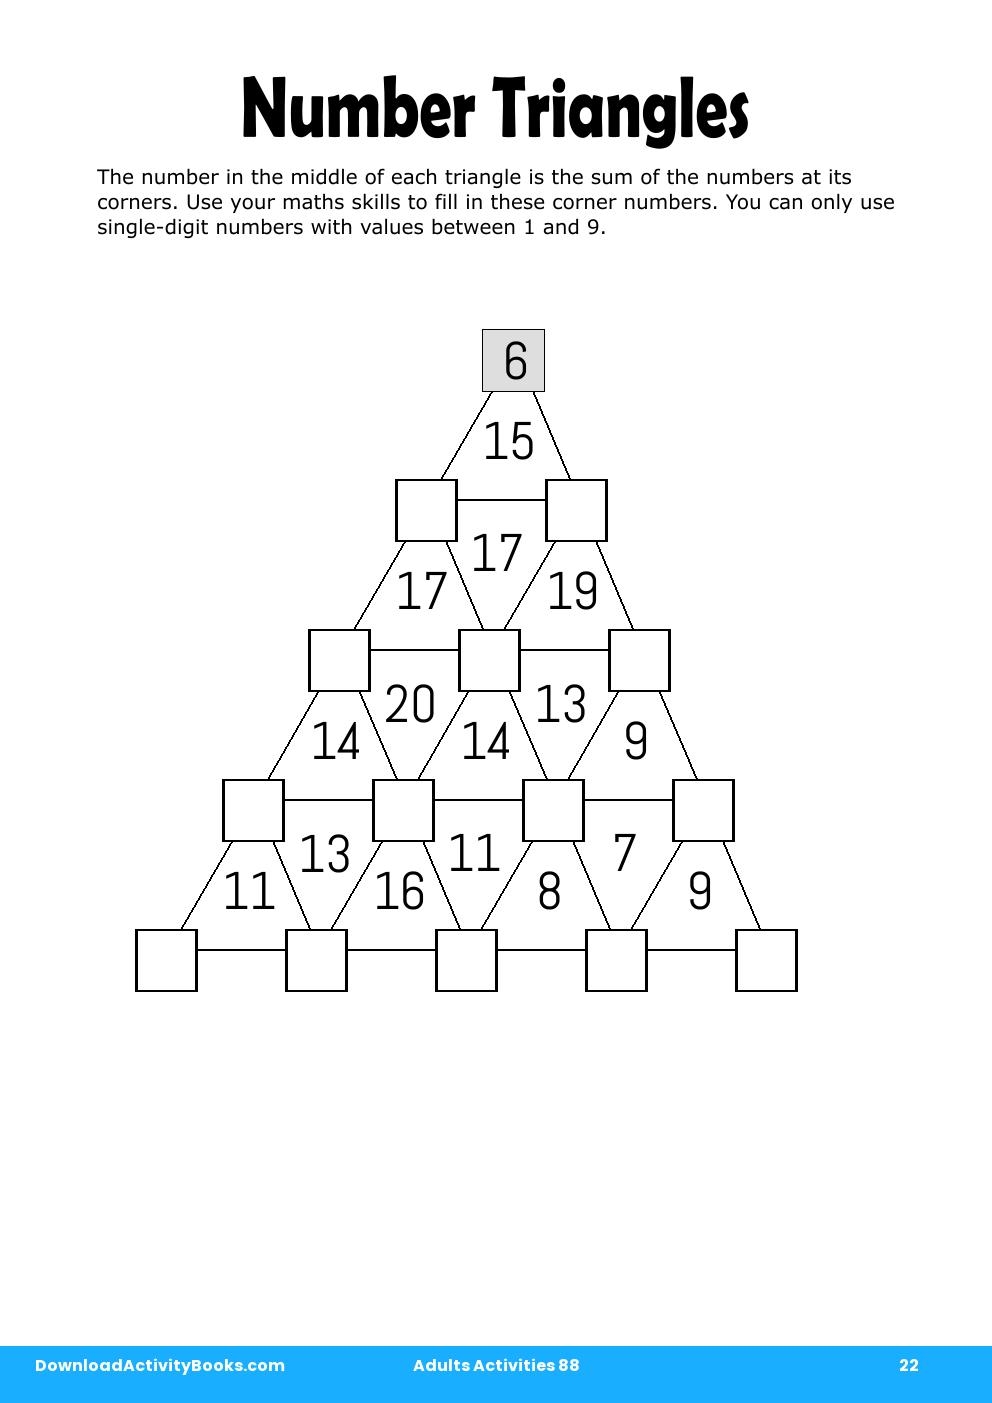 Number Triangles in Adults Activities 88